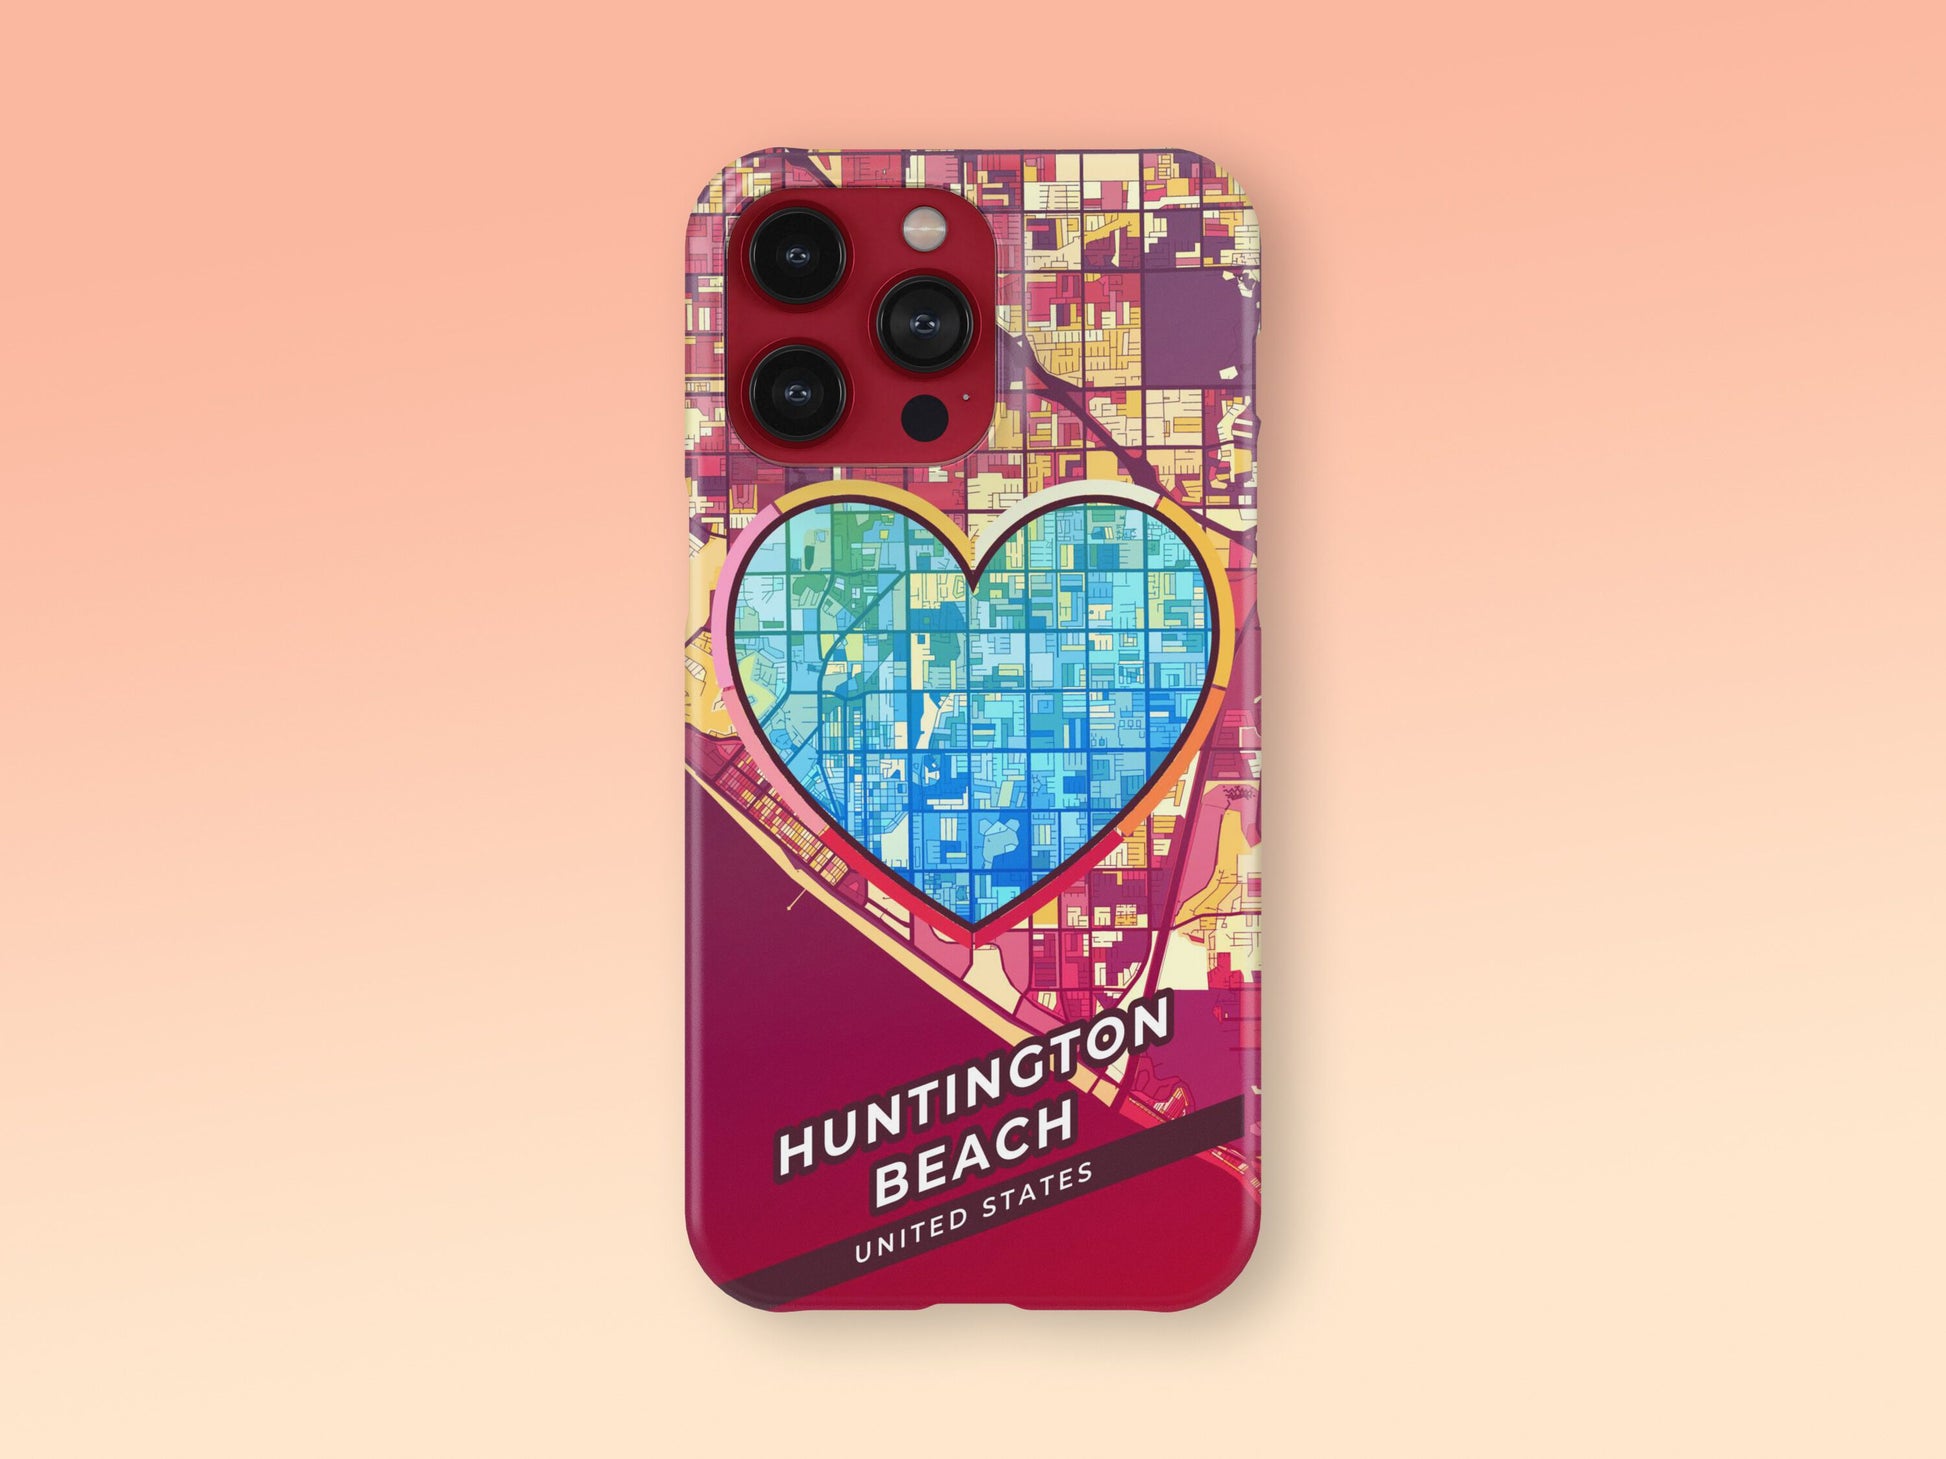 Huntington Beach California slim phone case with colorful icon. Birthday, wedding or housewarming gift. Couple match cases. 2